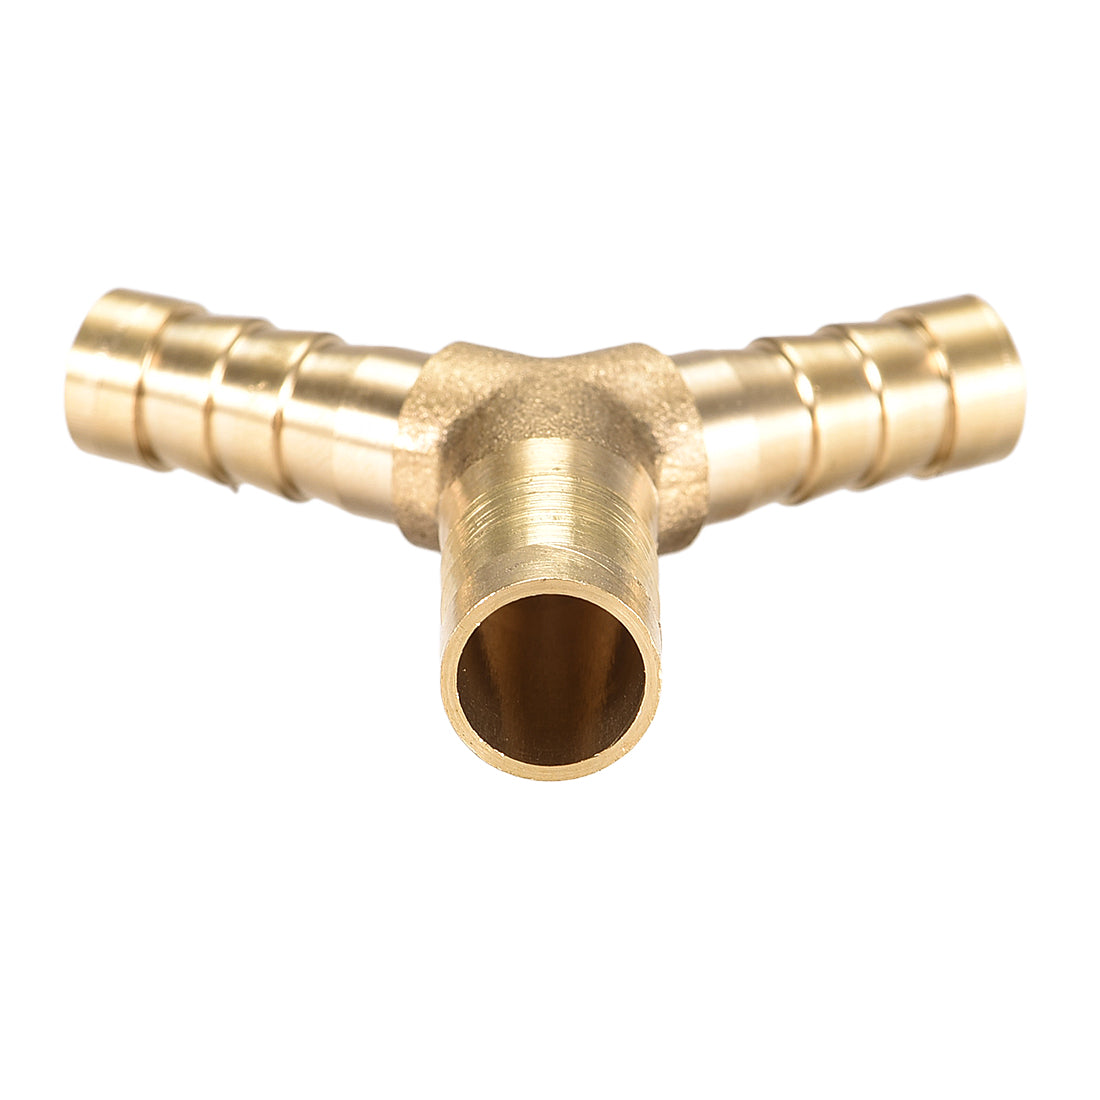 Uxcell Uxcell Tee Brass Barb Fitting Reducer Y Shape 3 Way Fit Hose ID 12x8x8mm 3pcs